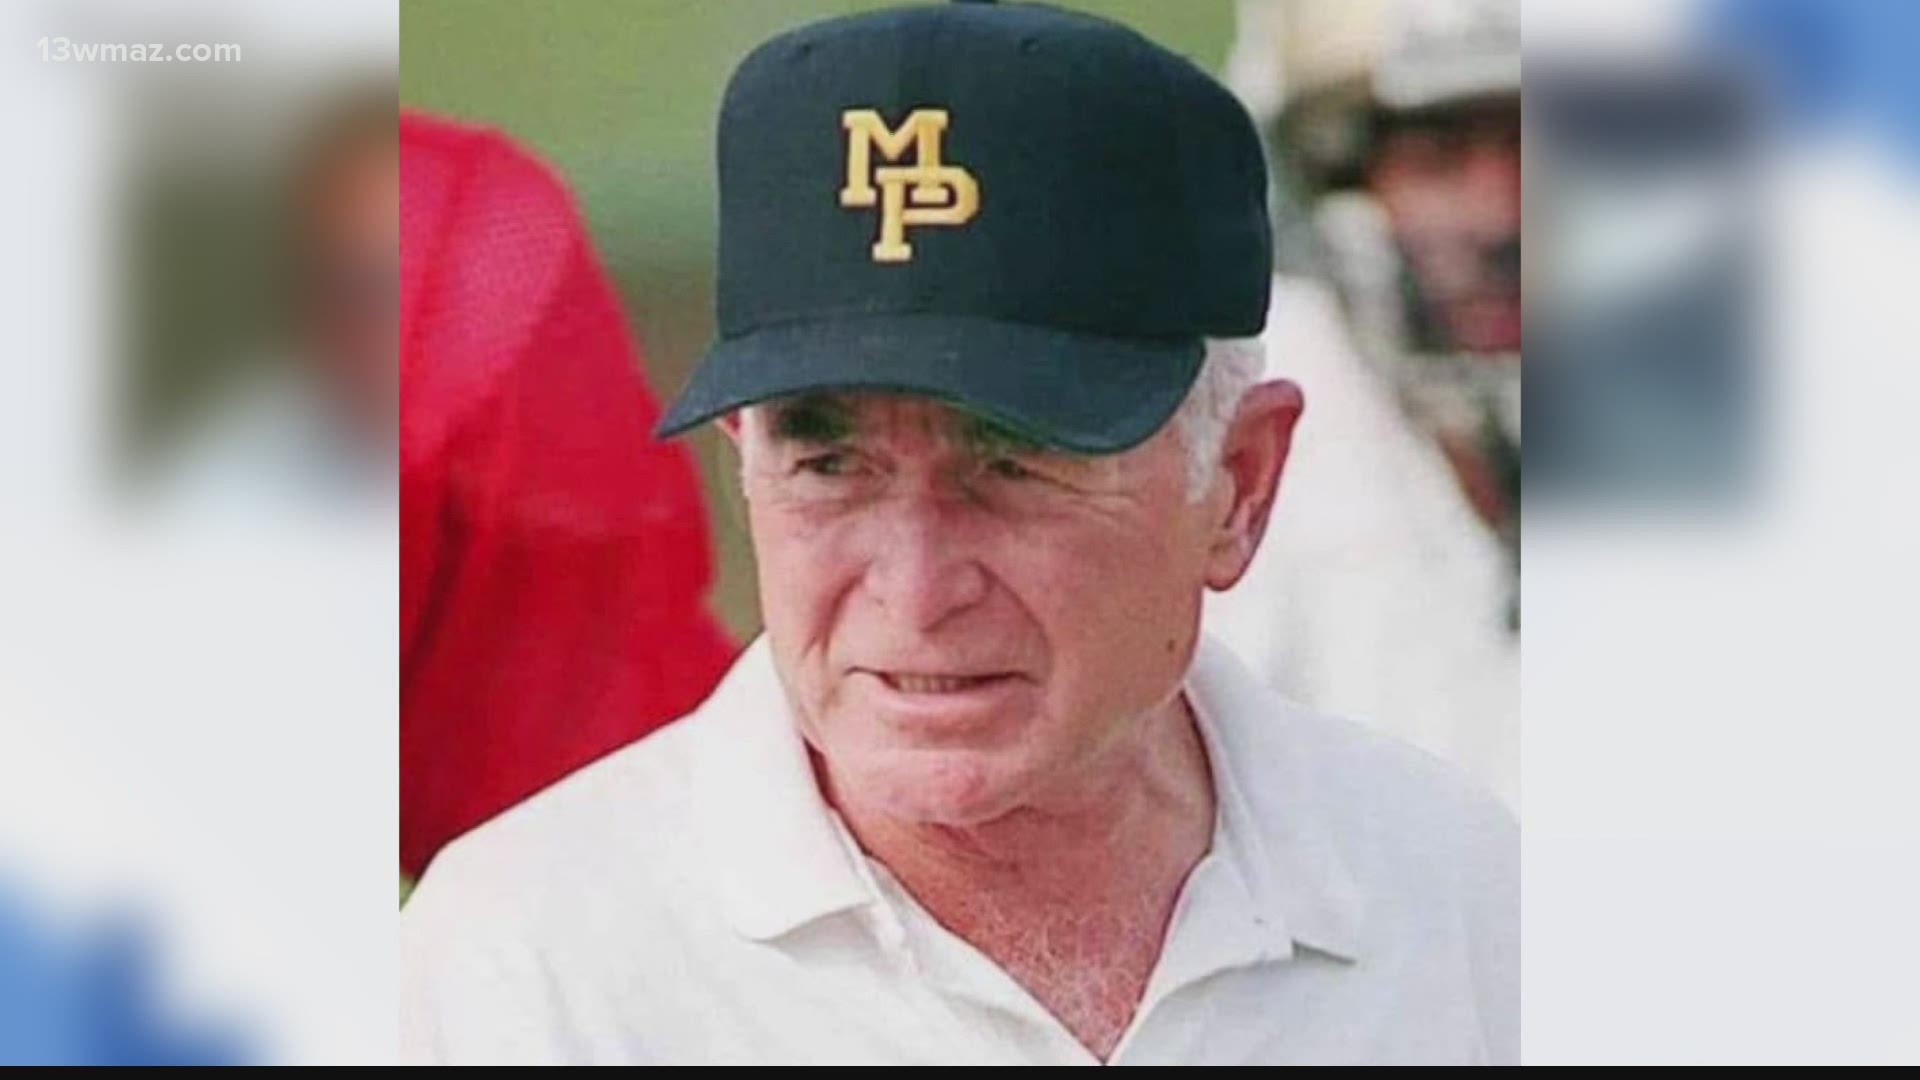 The legendary Dan Pitts passed away Tuesday. A slew of high school coaches who have influenced Central Georgia recently have passed on.